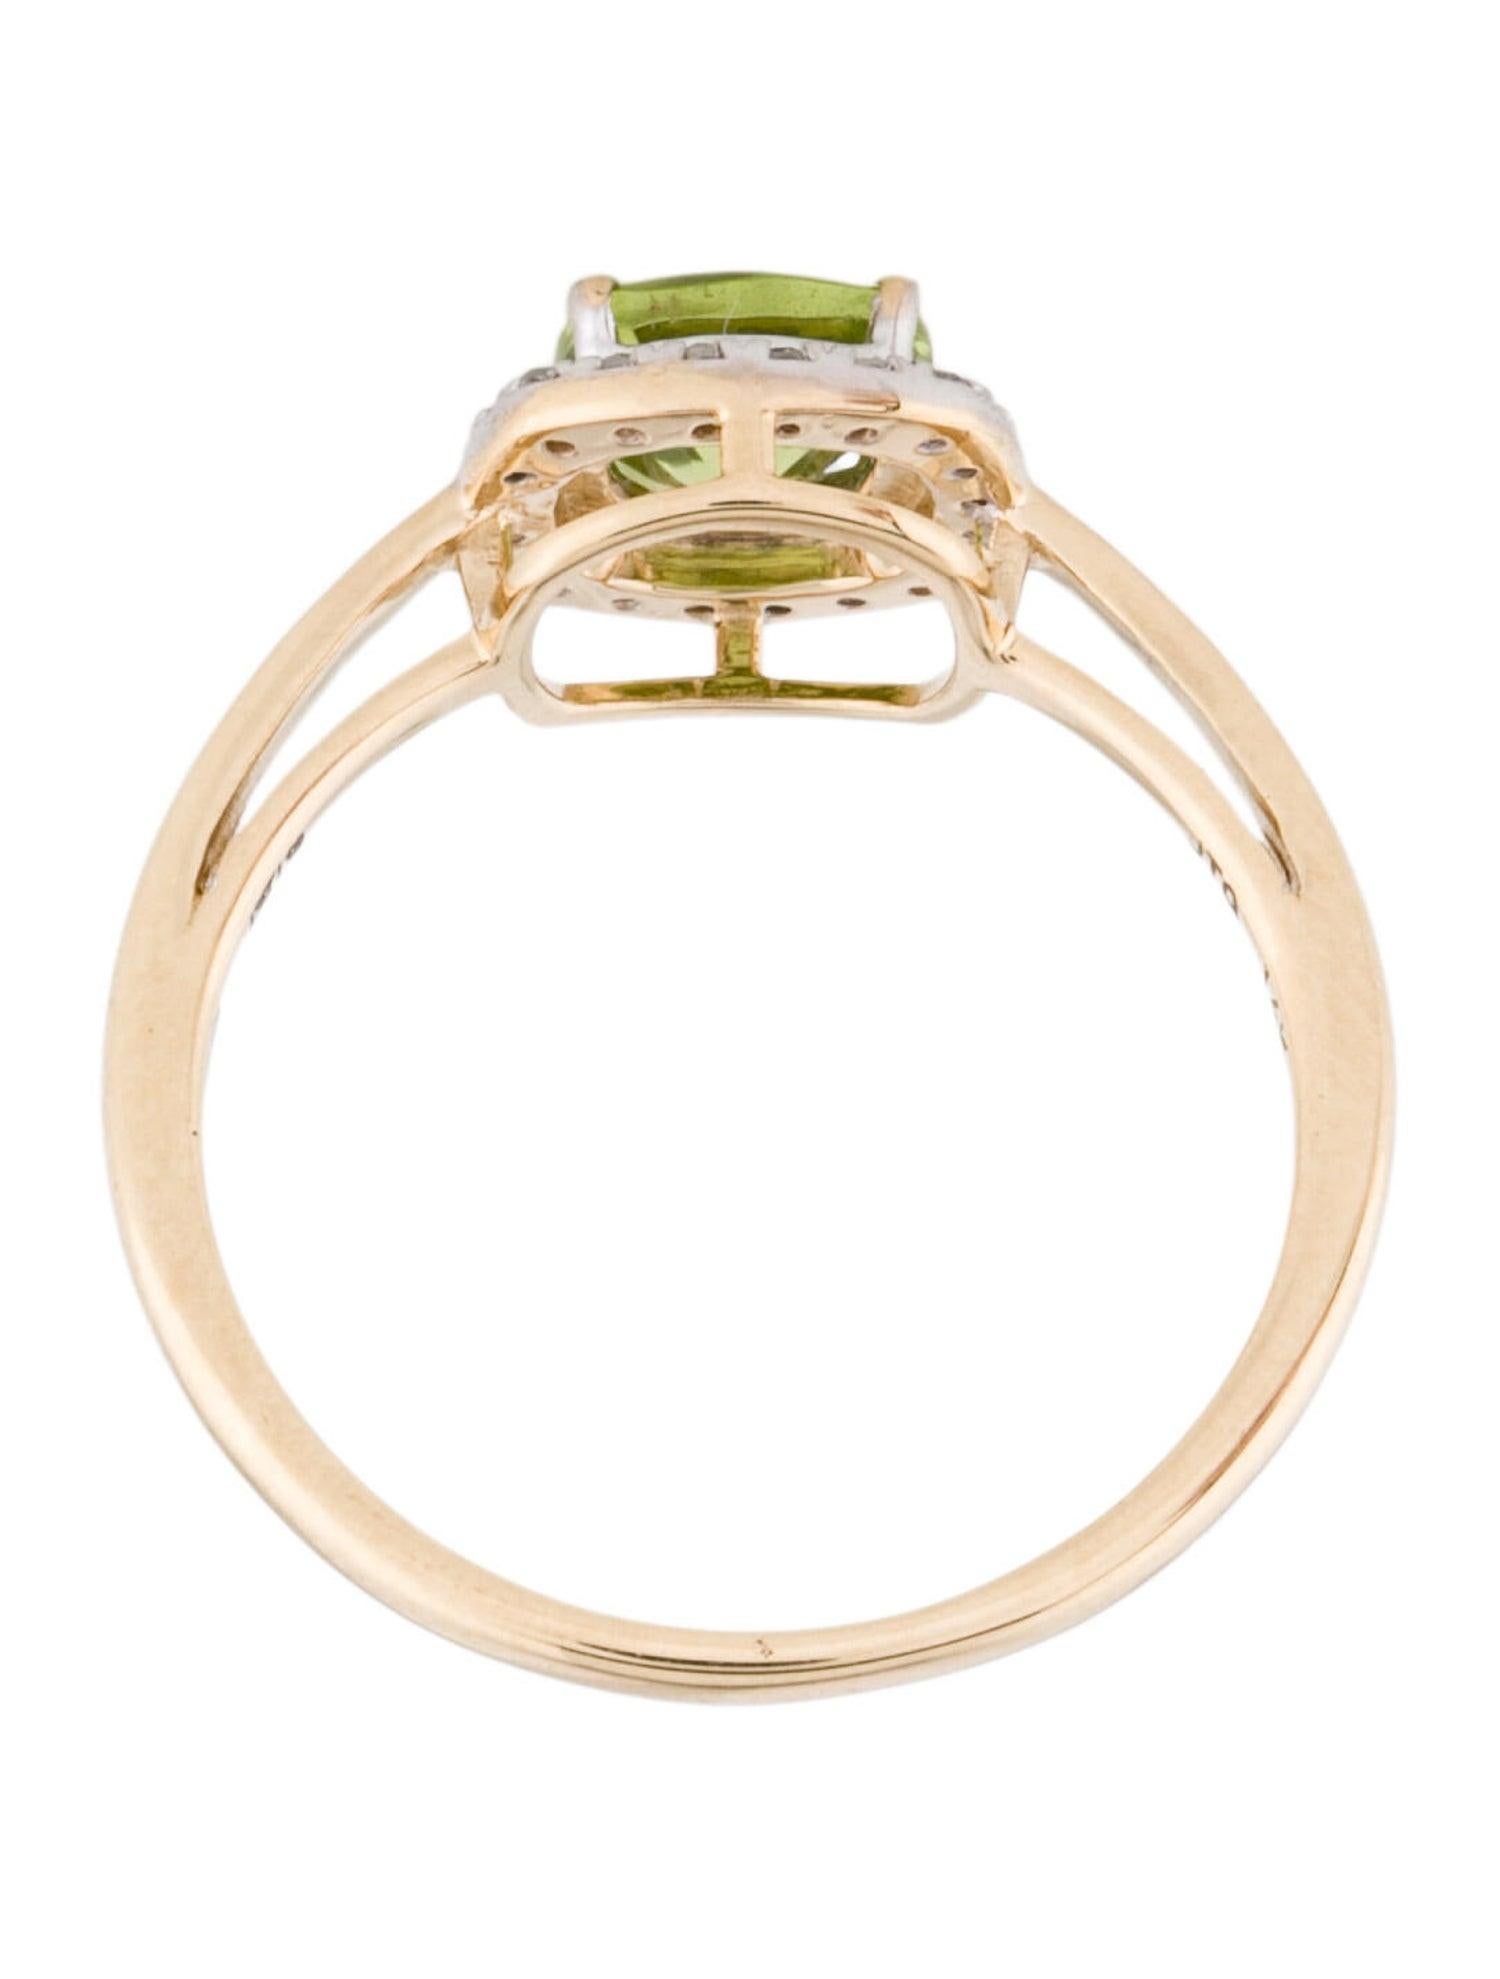 Gorgeous 14K 1.23ct Peridot & Diamond Cocktail Ring Size 6.75 - Elegant Jewelry In New Condition For Sale In Holtsville, NY